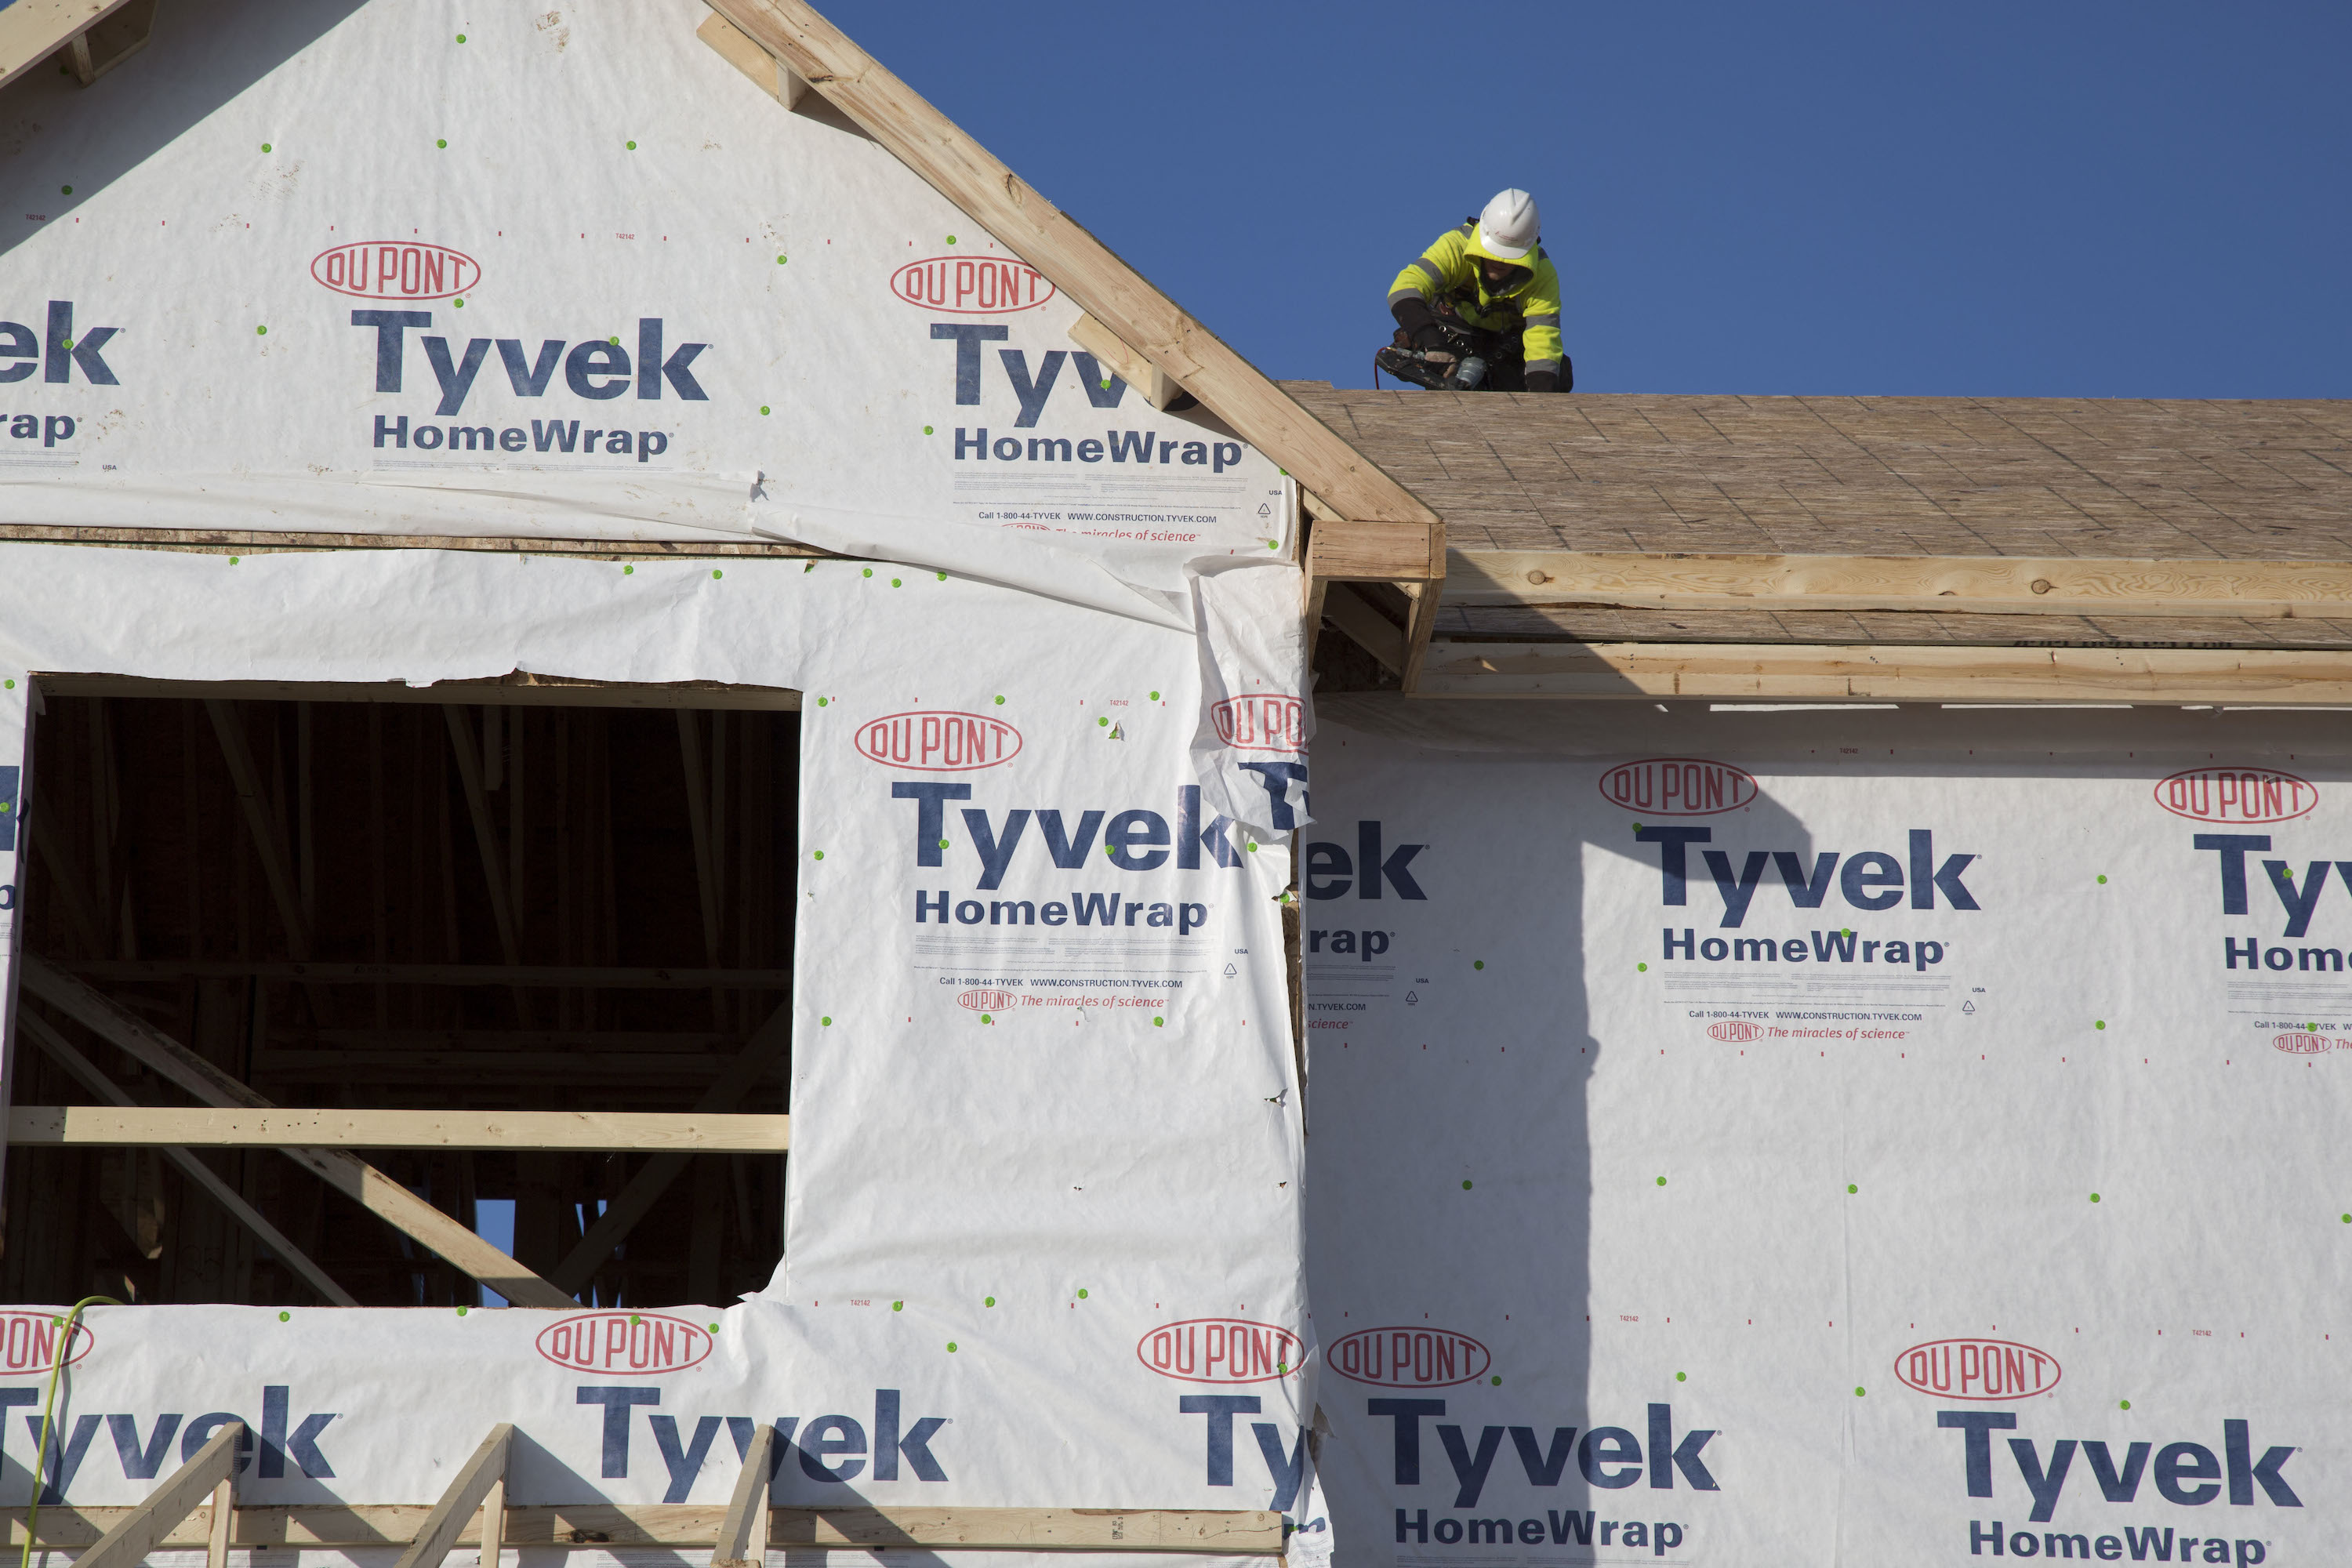 Image for Single Family Permits Spike in Rush to Avoid Code Changes